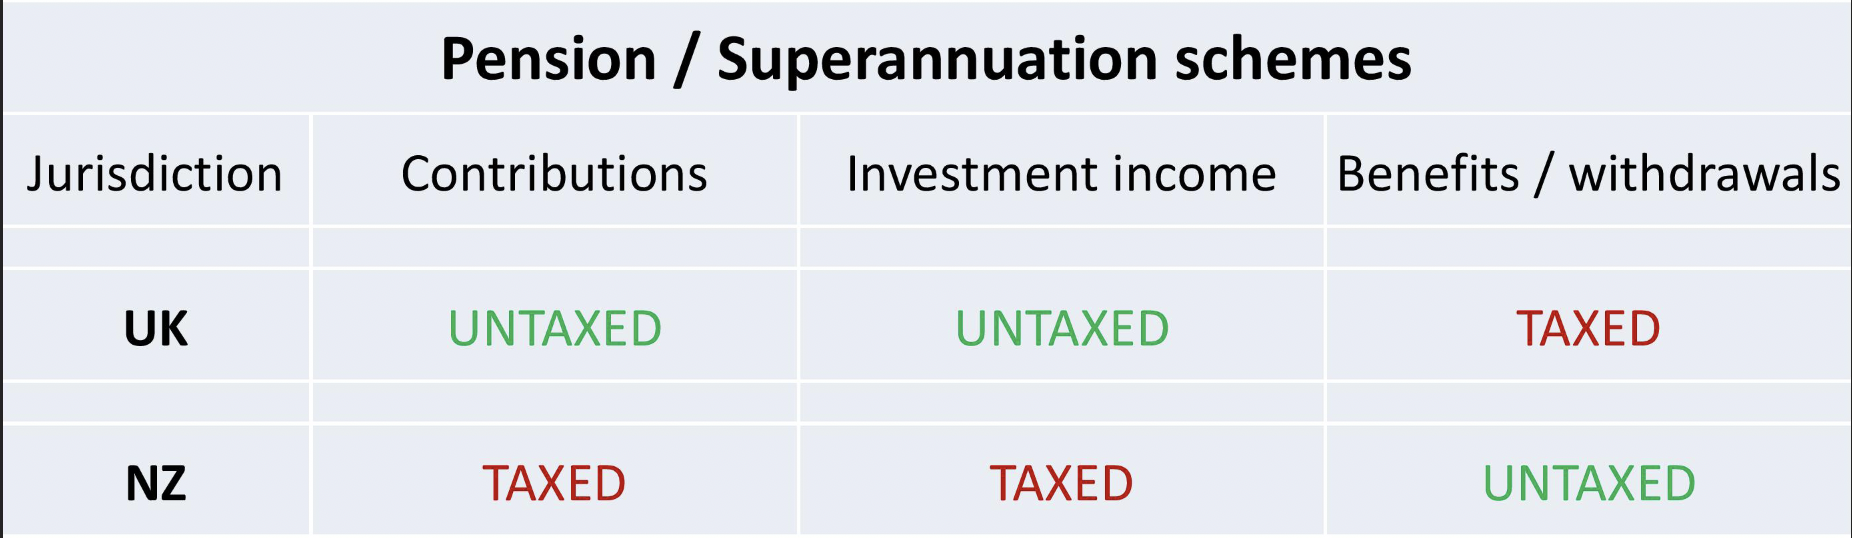 How the UK and NZ pension taxes differ